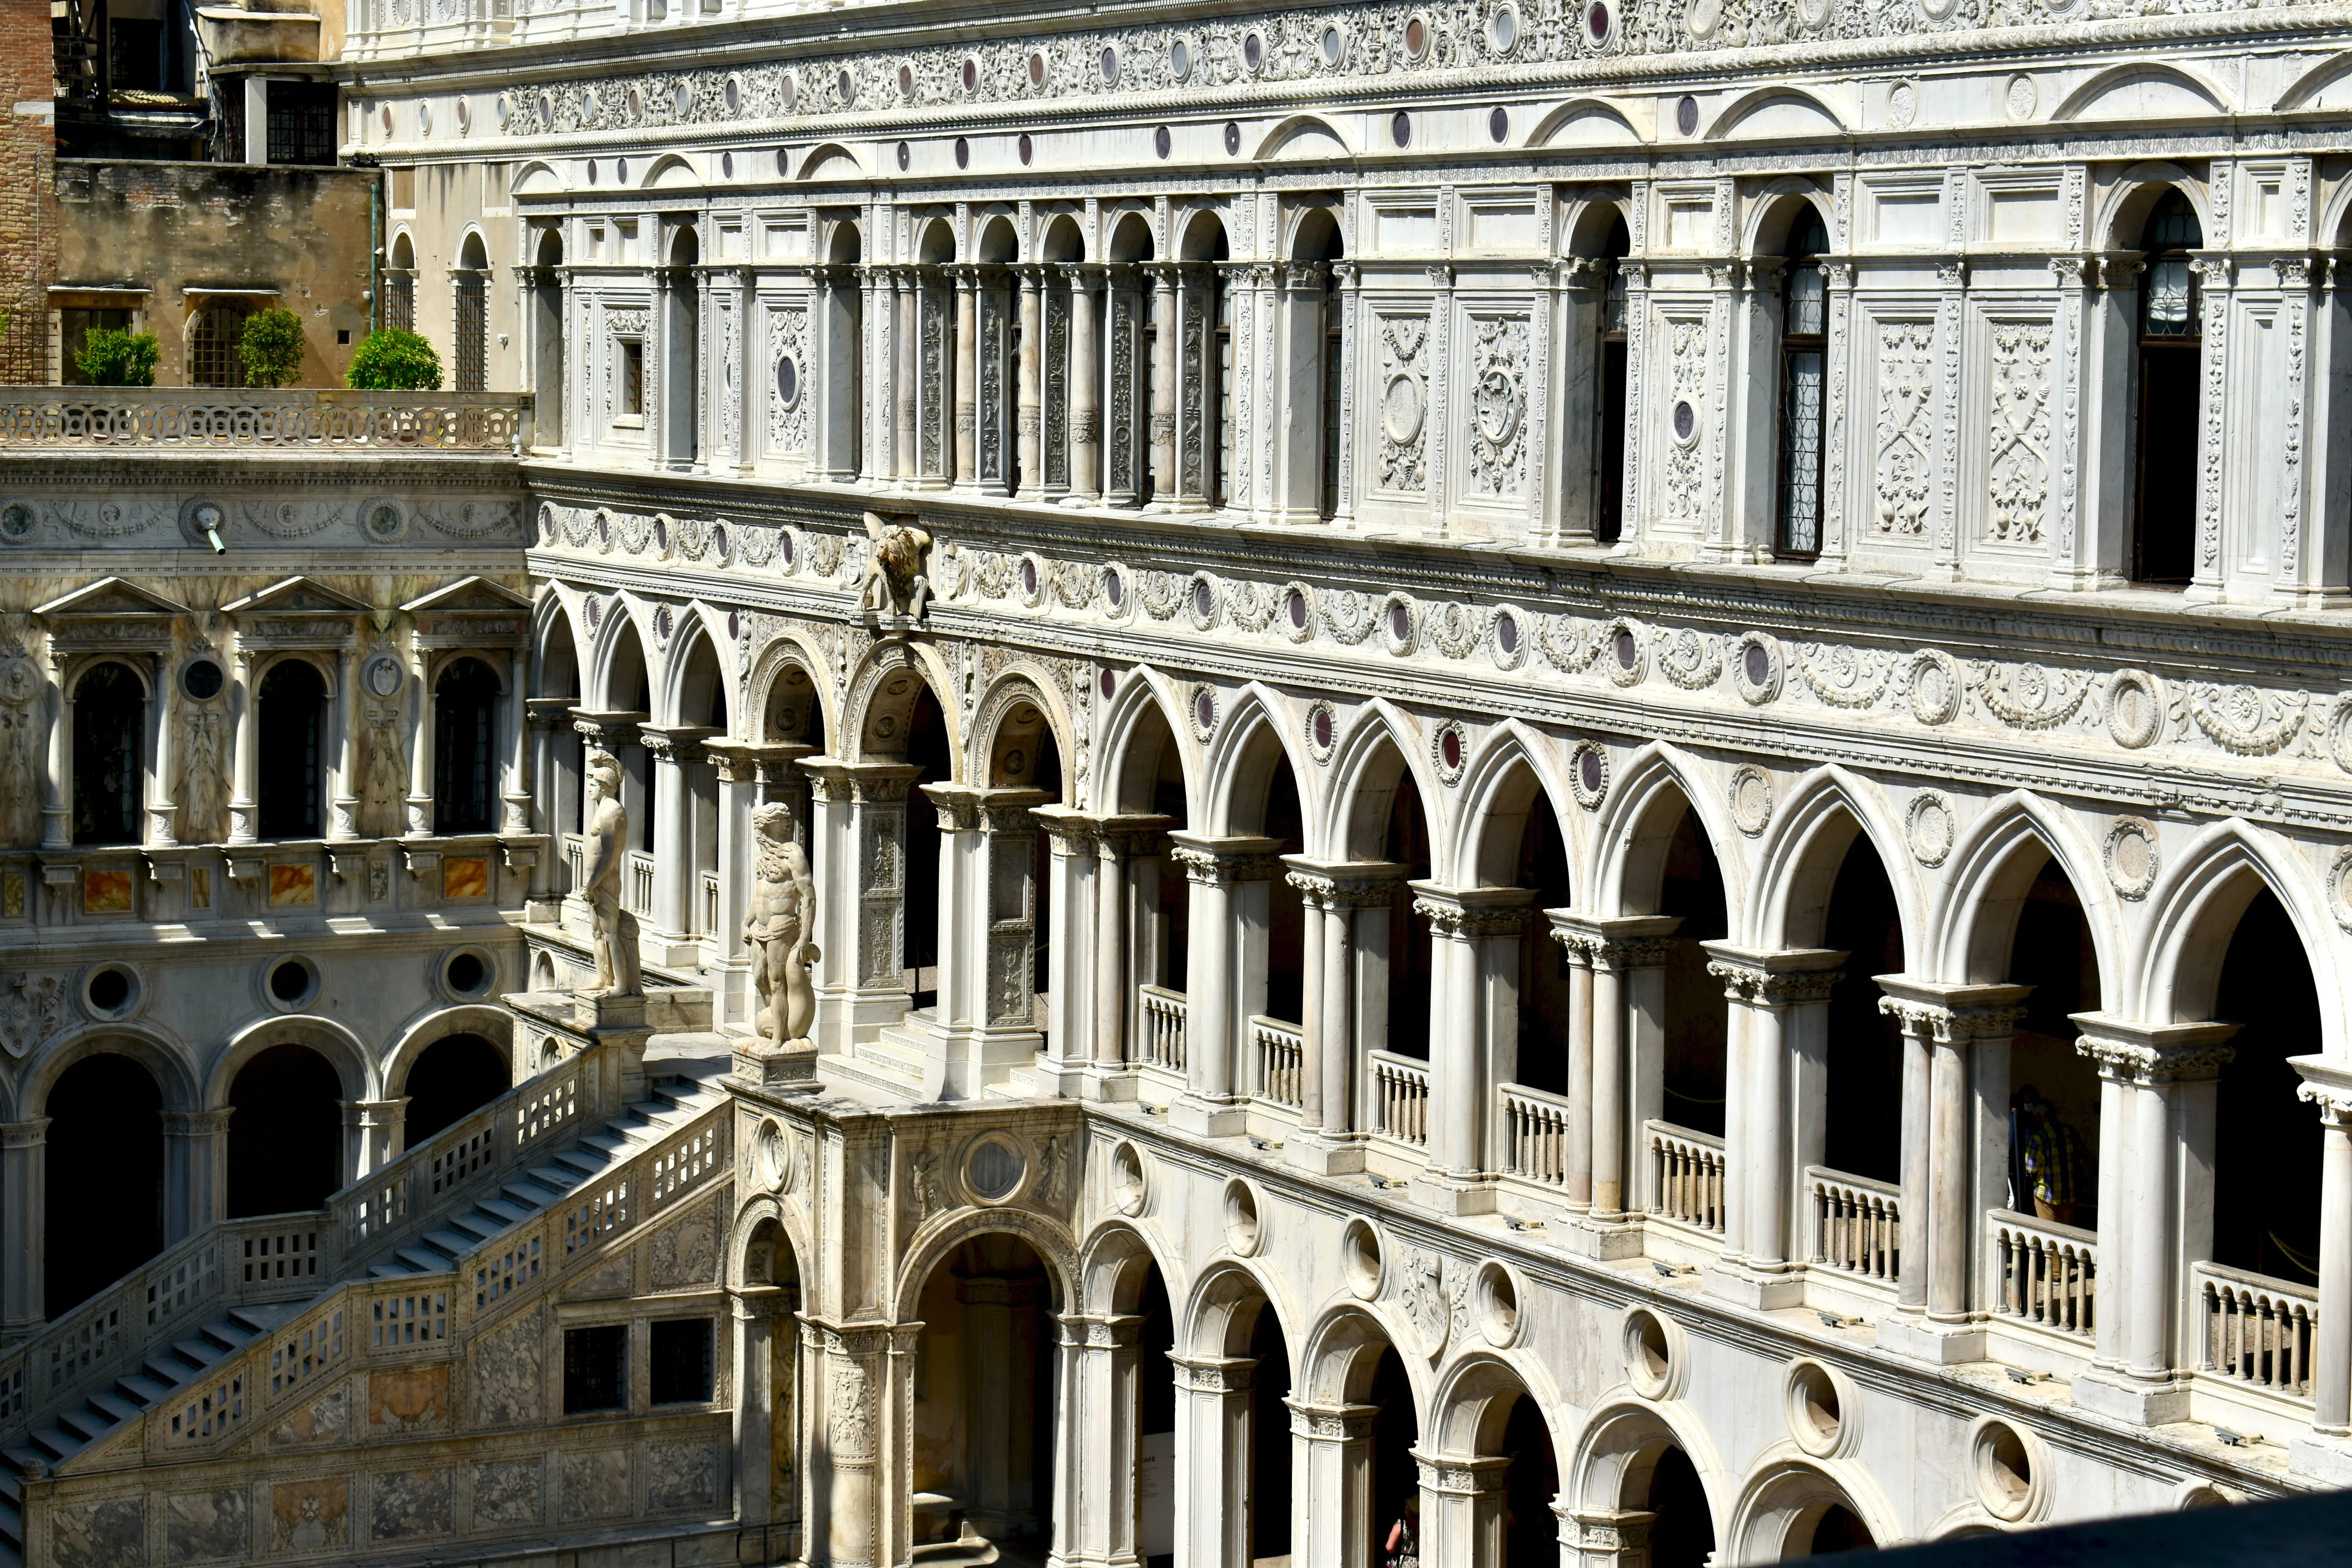 Courtyard view in Doge's Palace